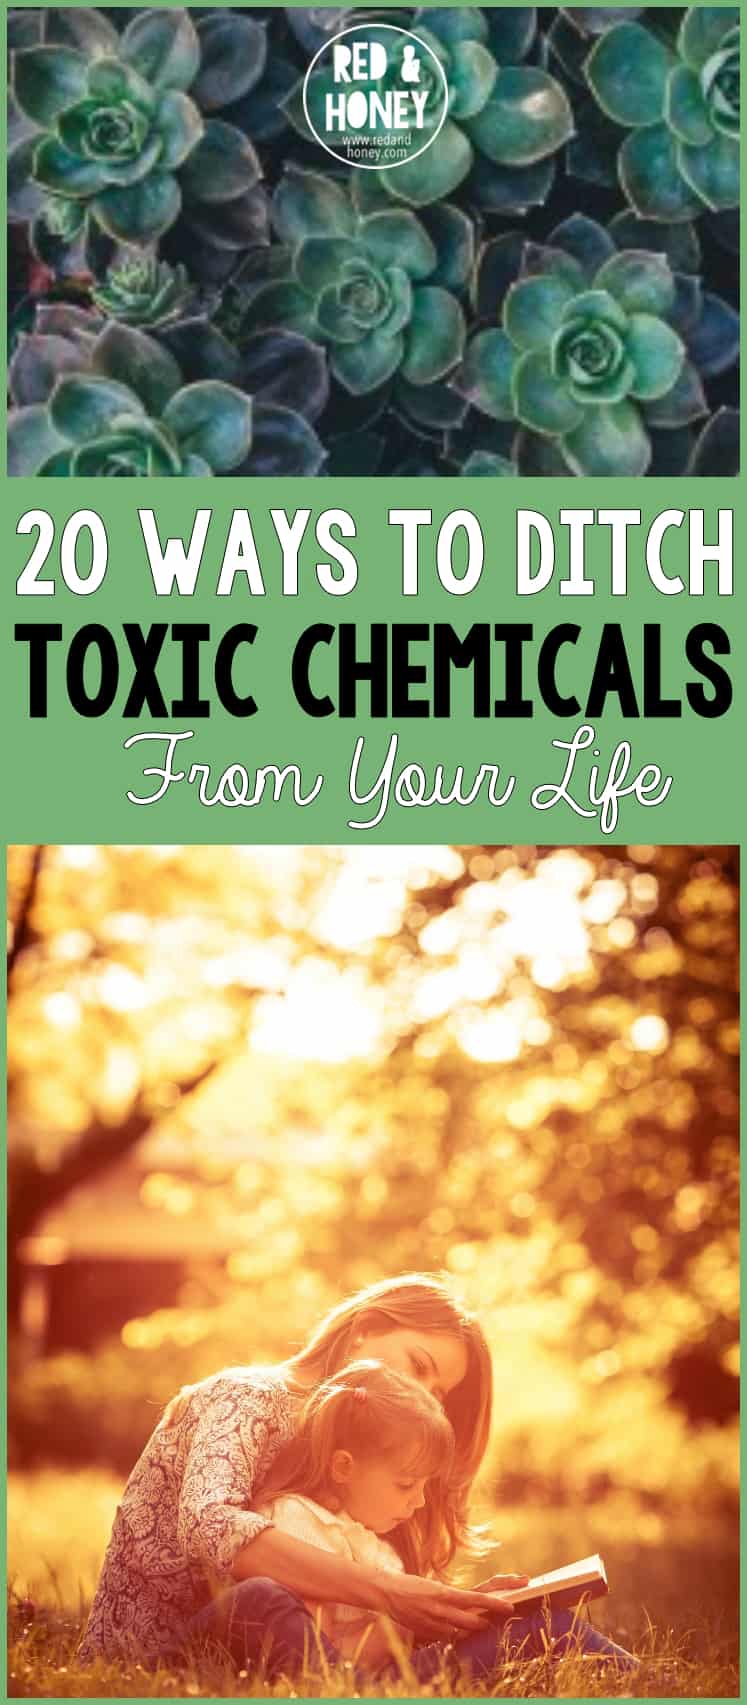 When I first started to experience chronic health issues, and realized the importance of reducing the toxic burden on my body, I was shocked at how harsh the products are that we use in and around our bodies every day! After cutting out the toxic chemicals in many areas of my life these past few years, I’ve noticed a huge difference in how I feel.